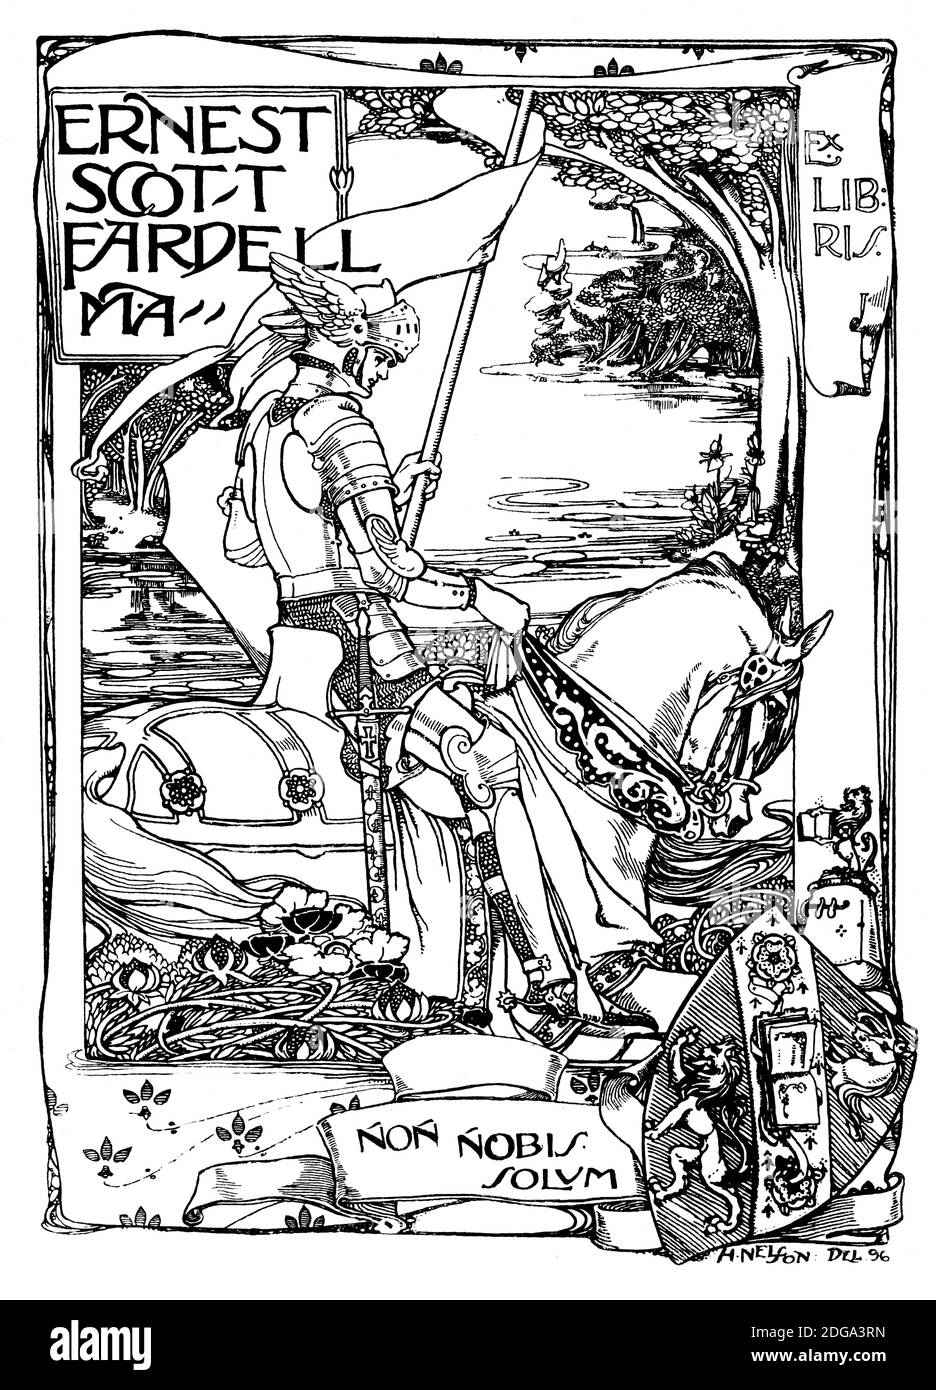 Knight on horseback bookplate design for Ernest Scott Fardell, by Harold Nelson from 1896 The Studio an Illustrated Magazine of Fine and Applied Art Stock Photo